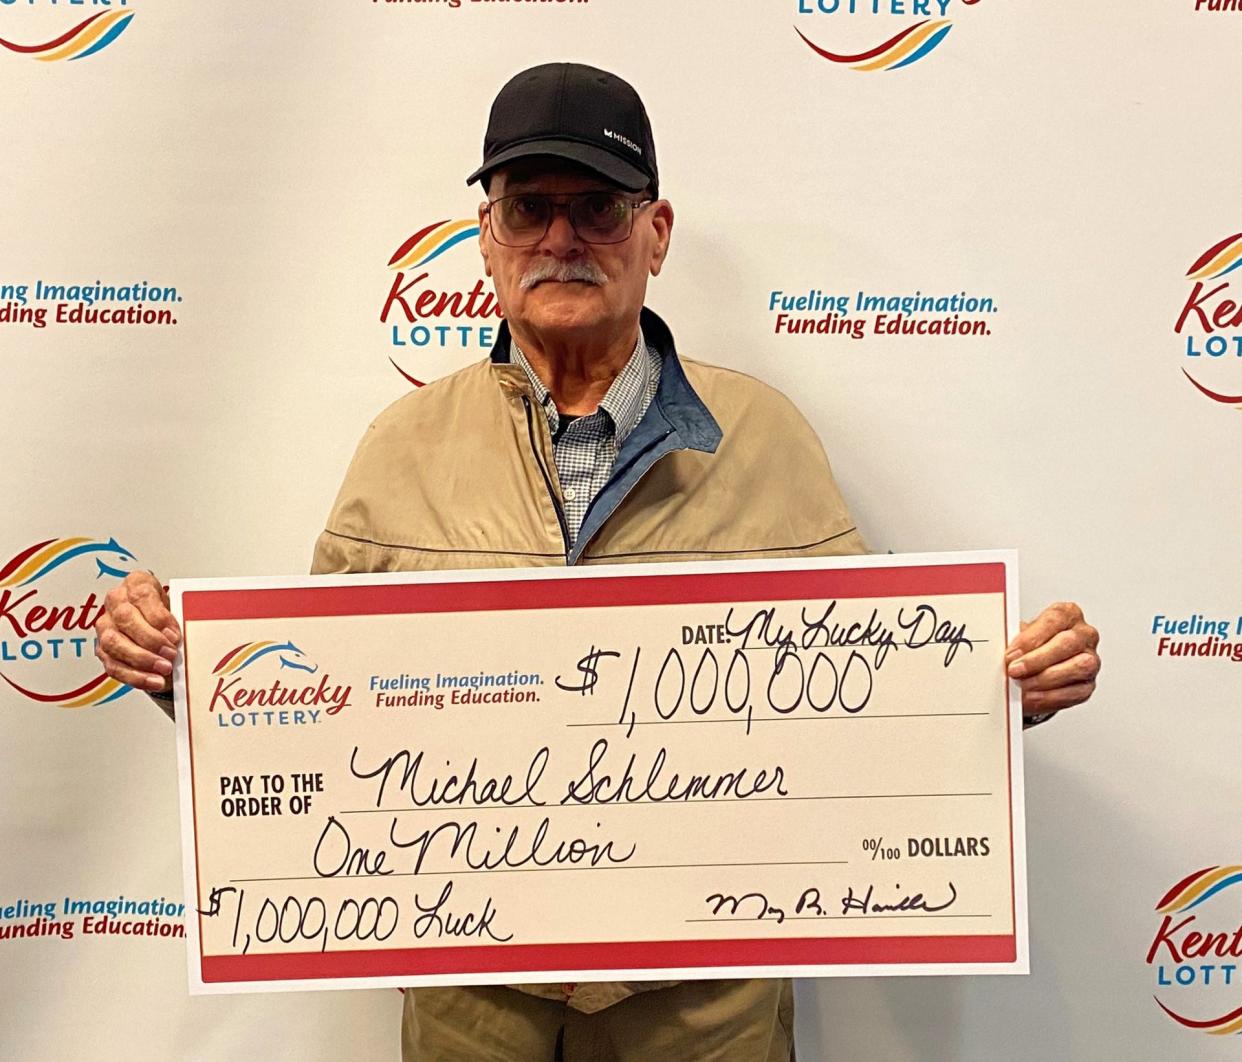 Michael Schlemmer, who was running out of gas and stopped to get some. While at the gas station, he also bought a lottery ticket and won a top $1,000,000 prize.